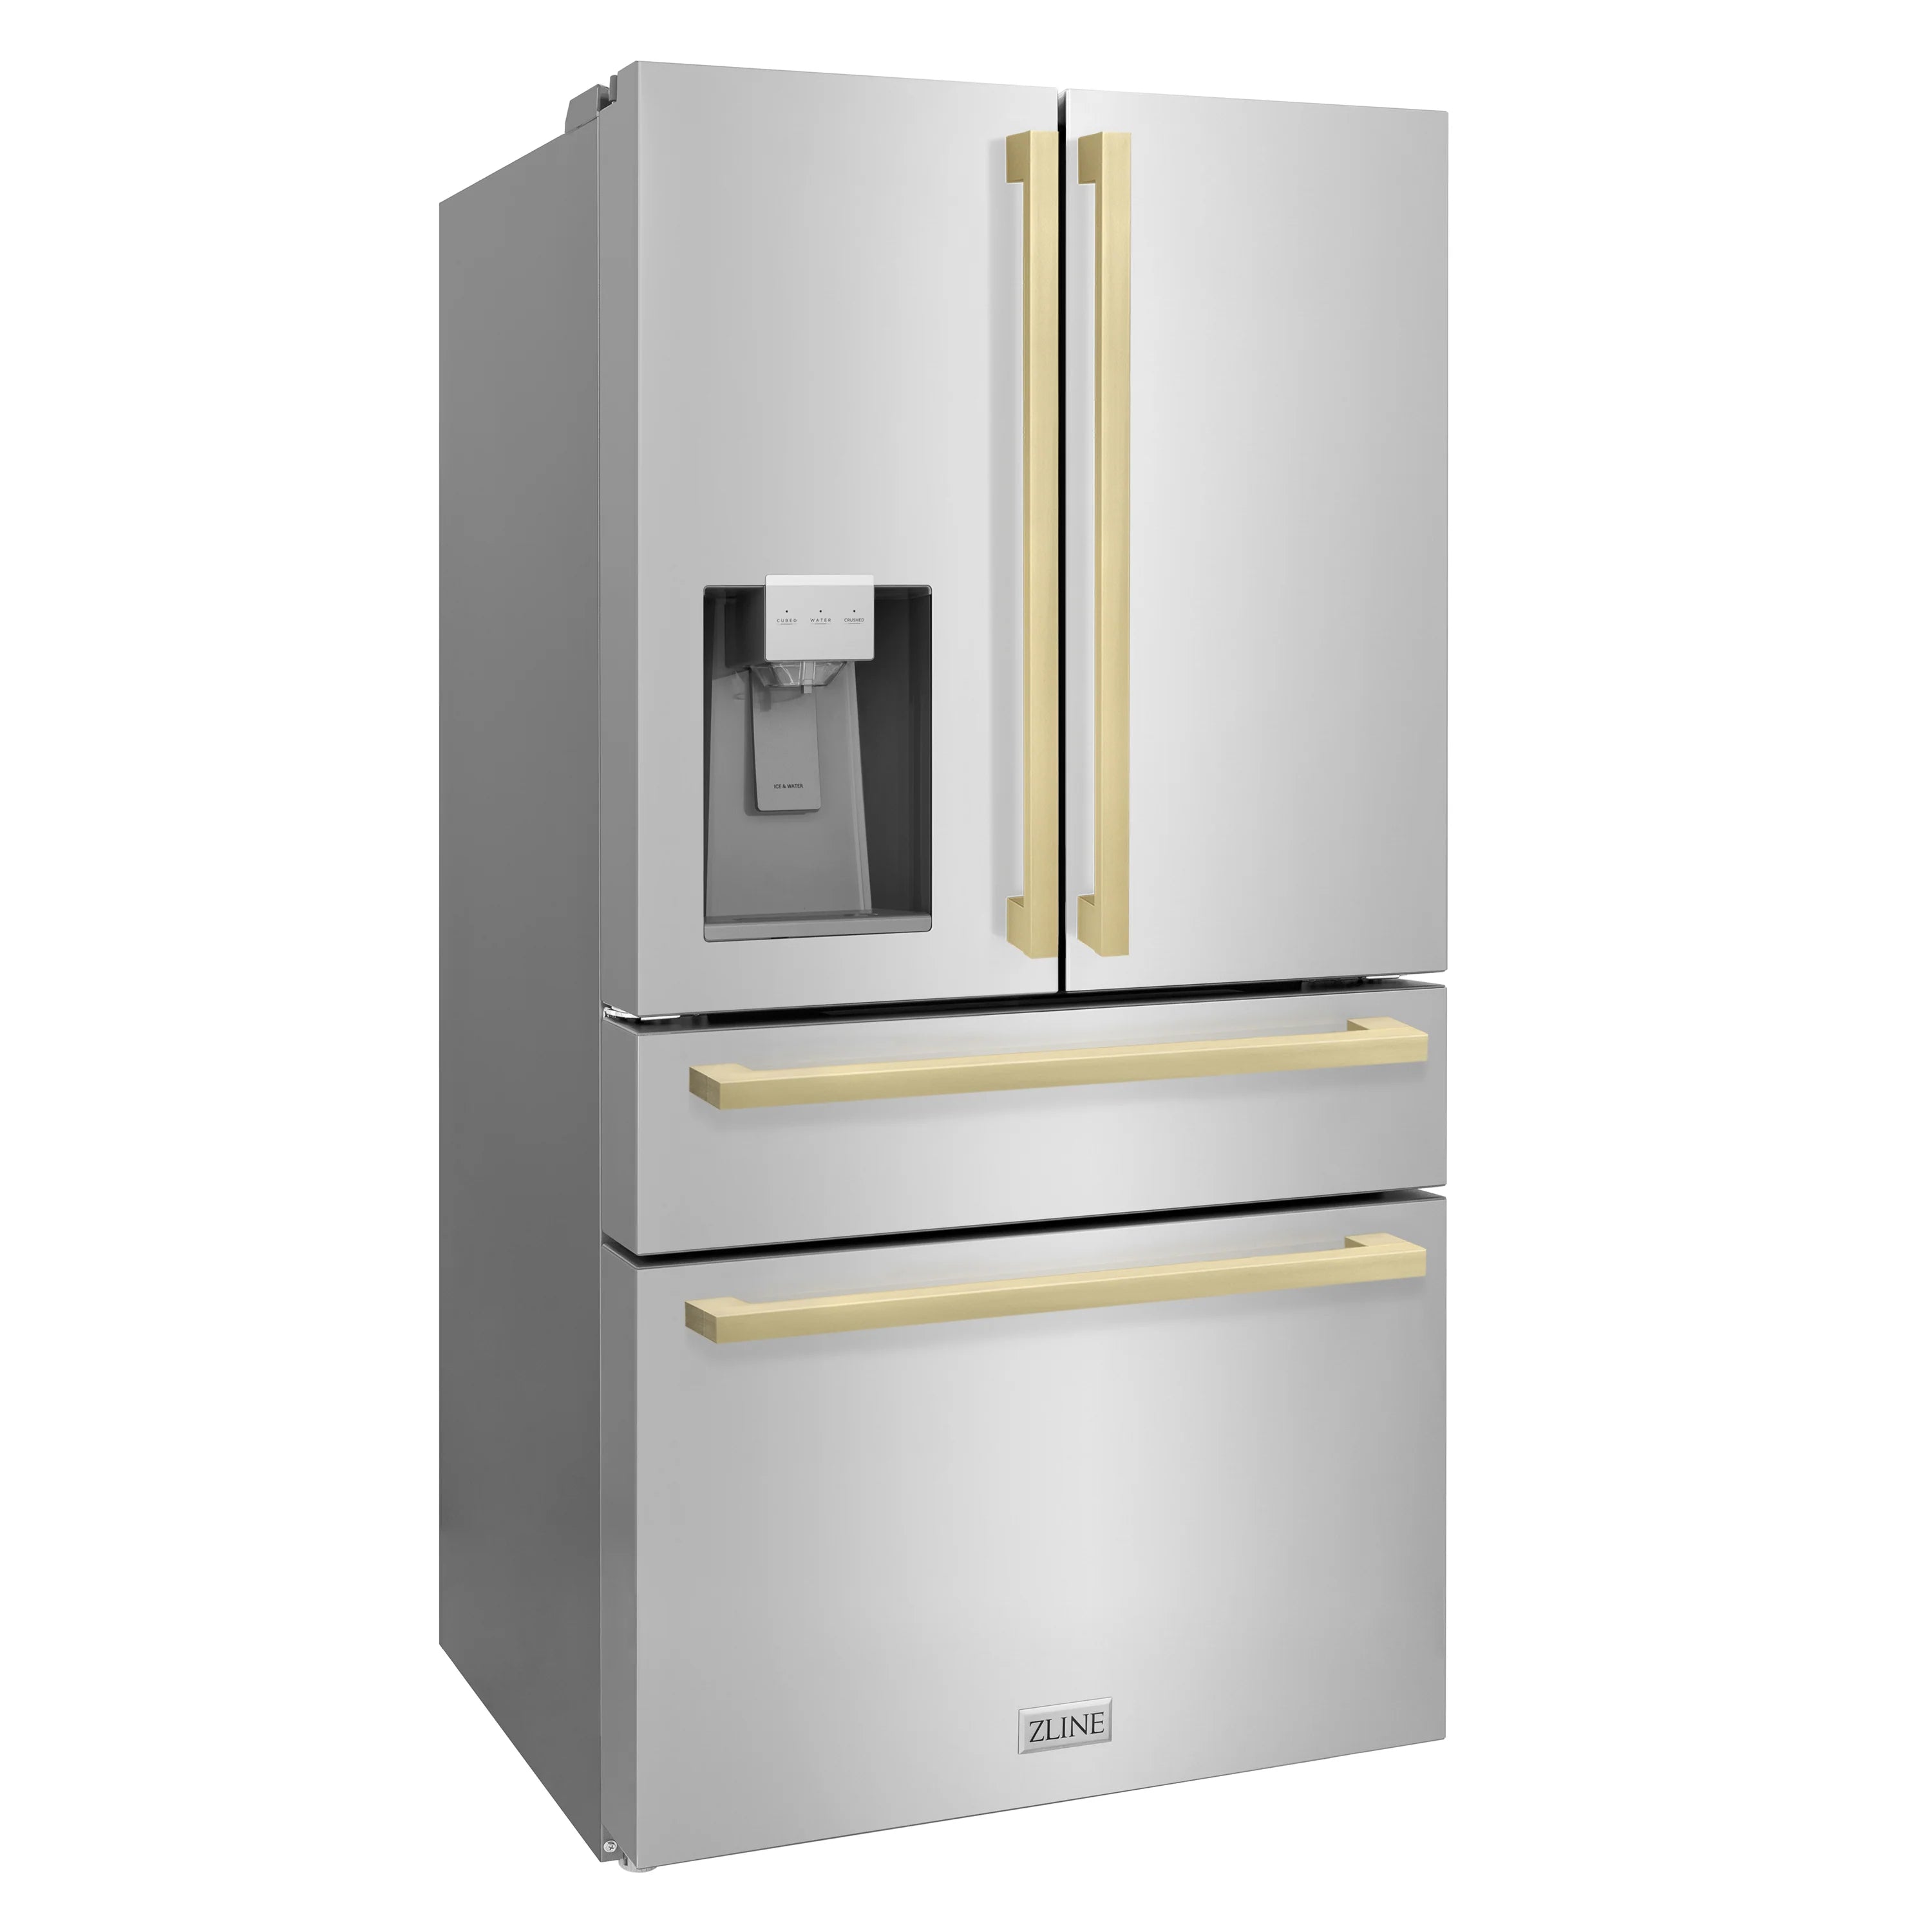 ZLINE 36" Autograph Edition 21.6 cu. ft 4-Door French Door Refrigerator with Water and Ice Dispenser in Stainless Steel with Champagne Bronze Square Handles (RFMZ-W-36-FCB)